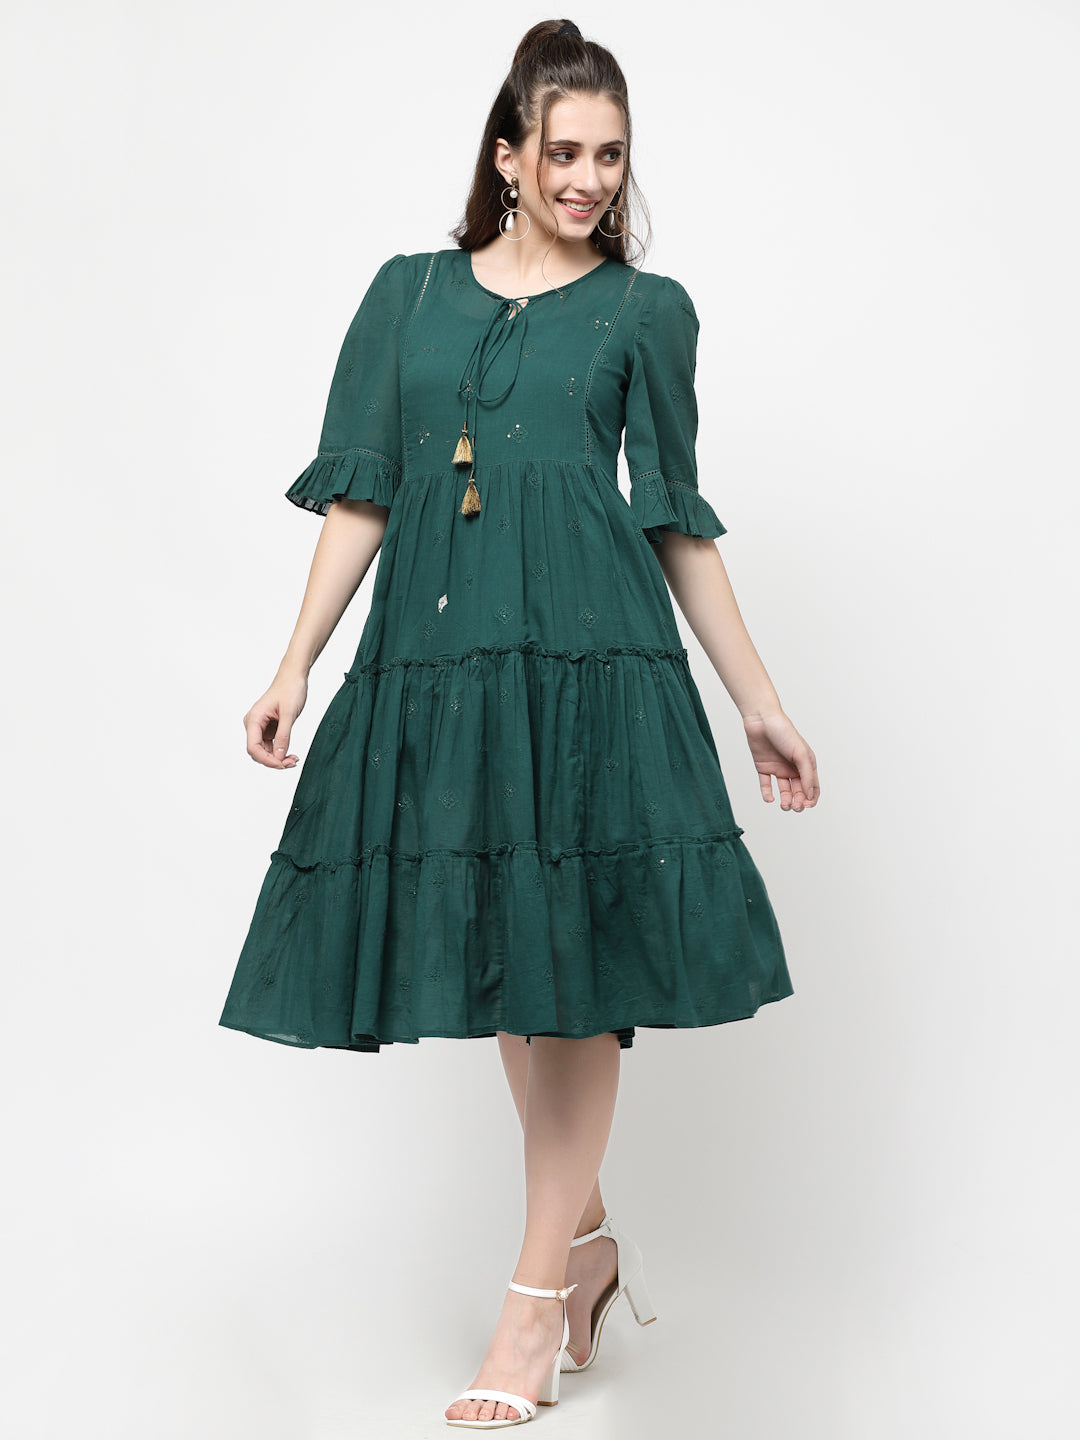 Terquois Embroidered Woven Dress with Lace,Tie-Up neck and Fashion sleeves Dresses TERQUOIS   